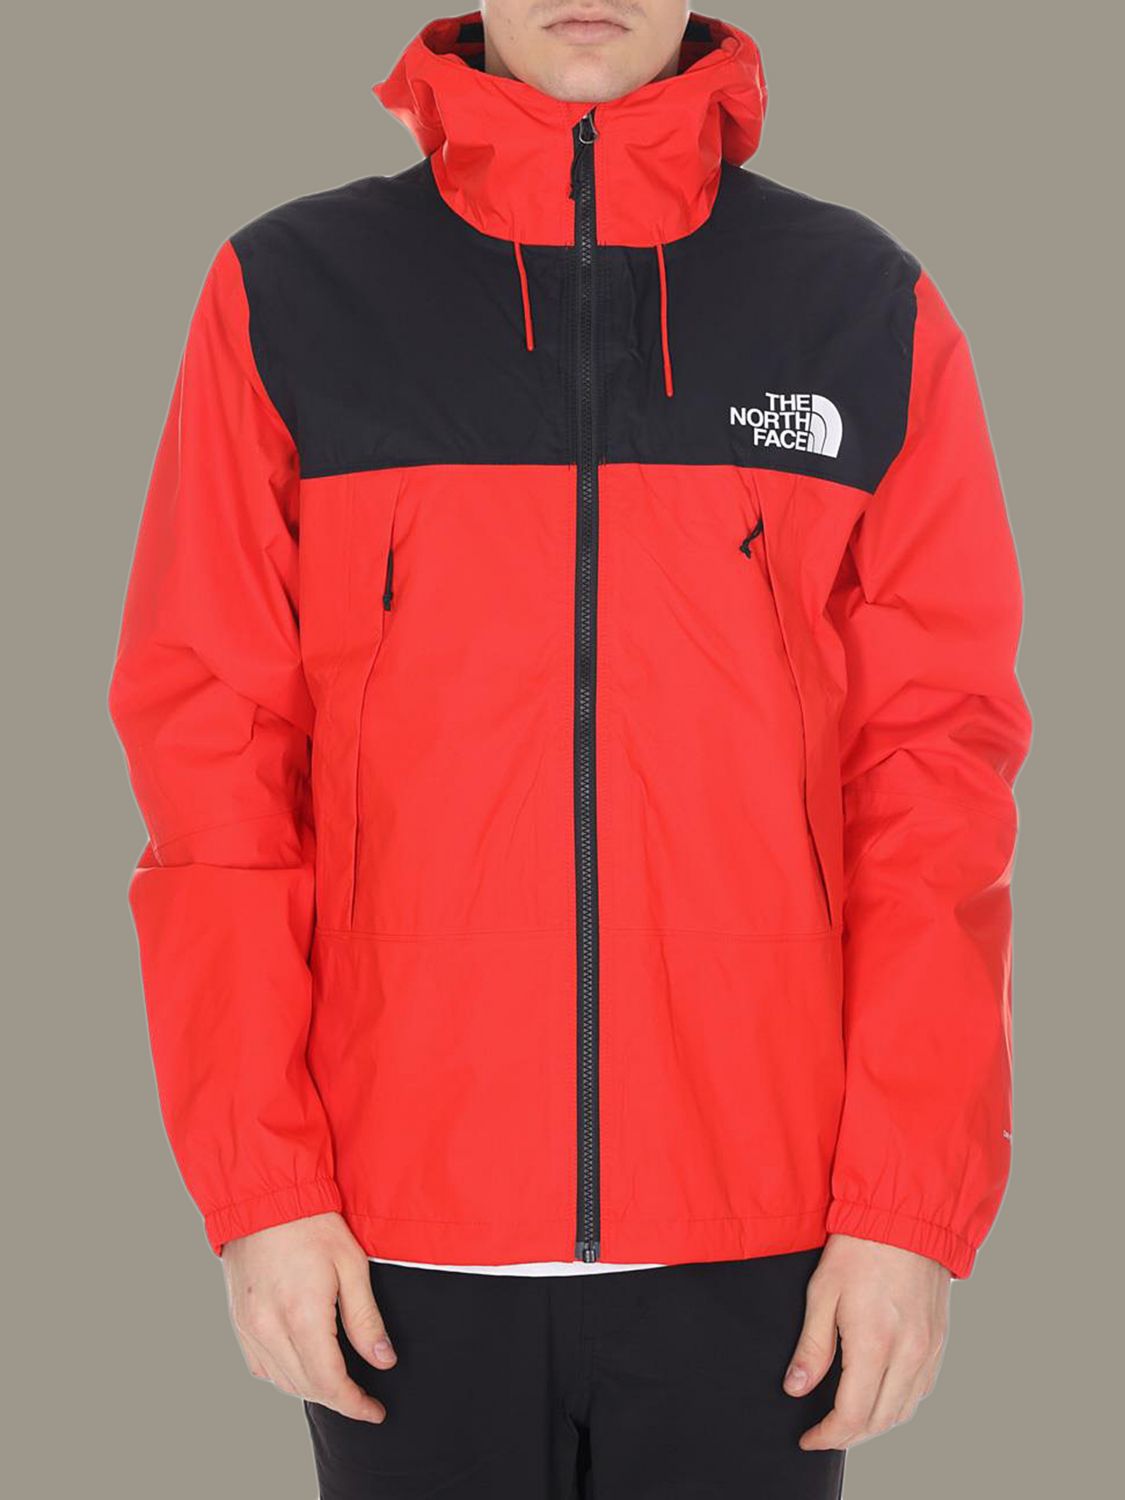 THE NORTH FACE: Jacket men | Jacket The North Face Men Red | Jacket The